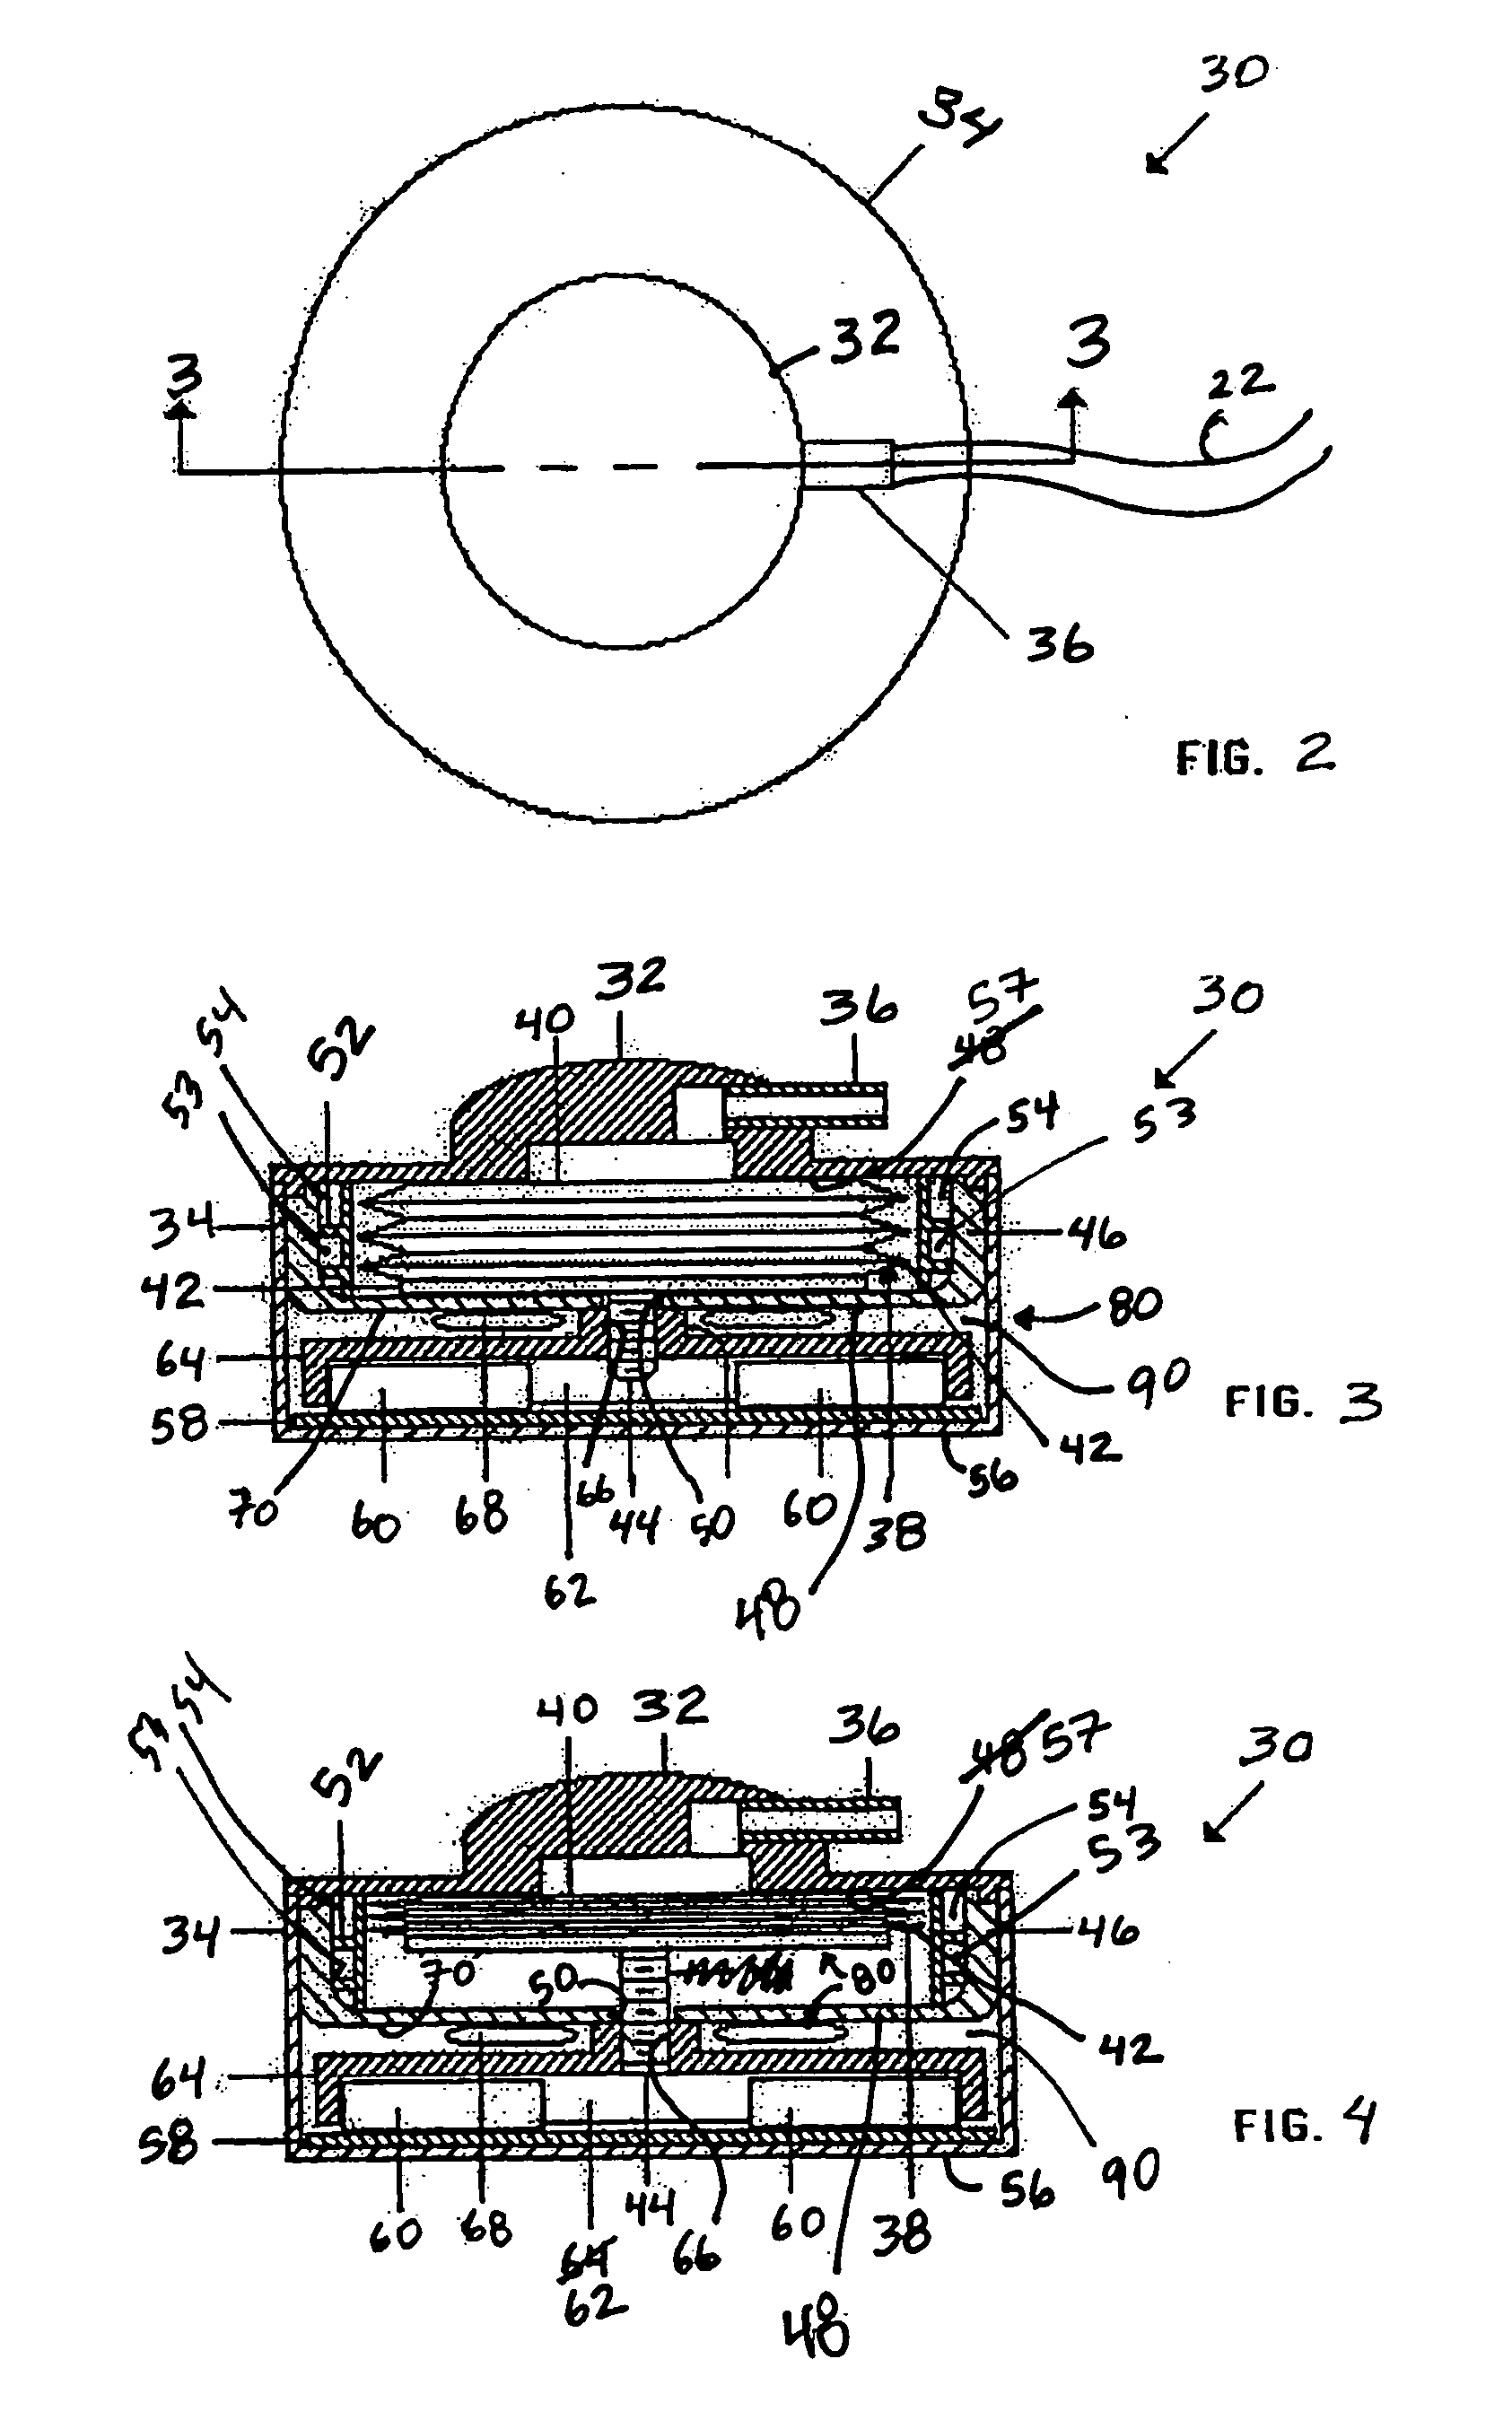 Metal bellows position feedback for hydraulic control of an adjustable gastric band